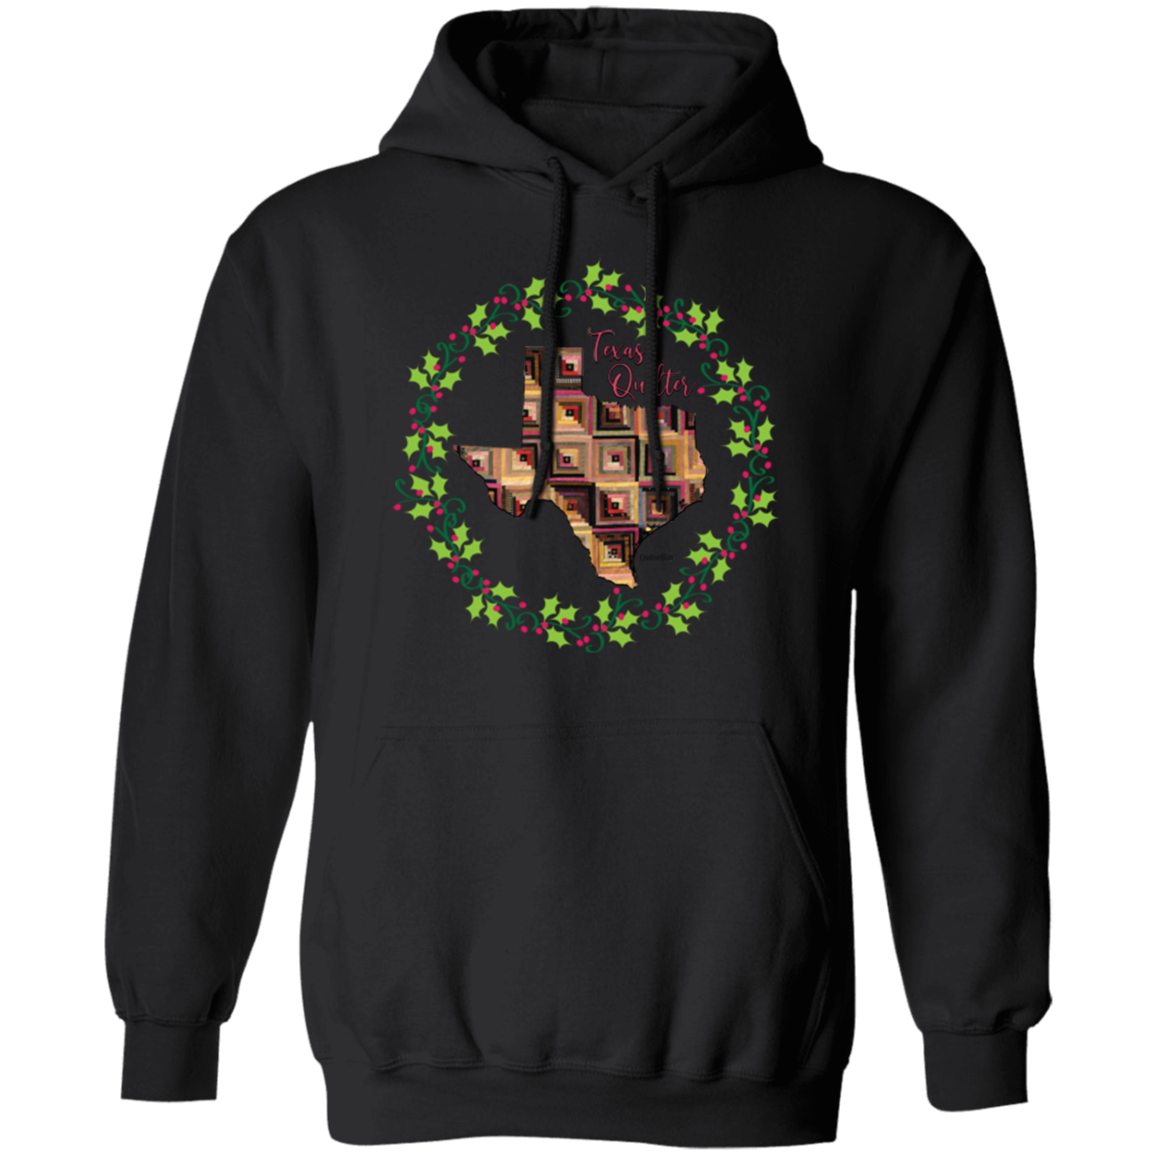 Texas Quilter Christmas Pullover Hoodie